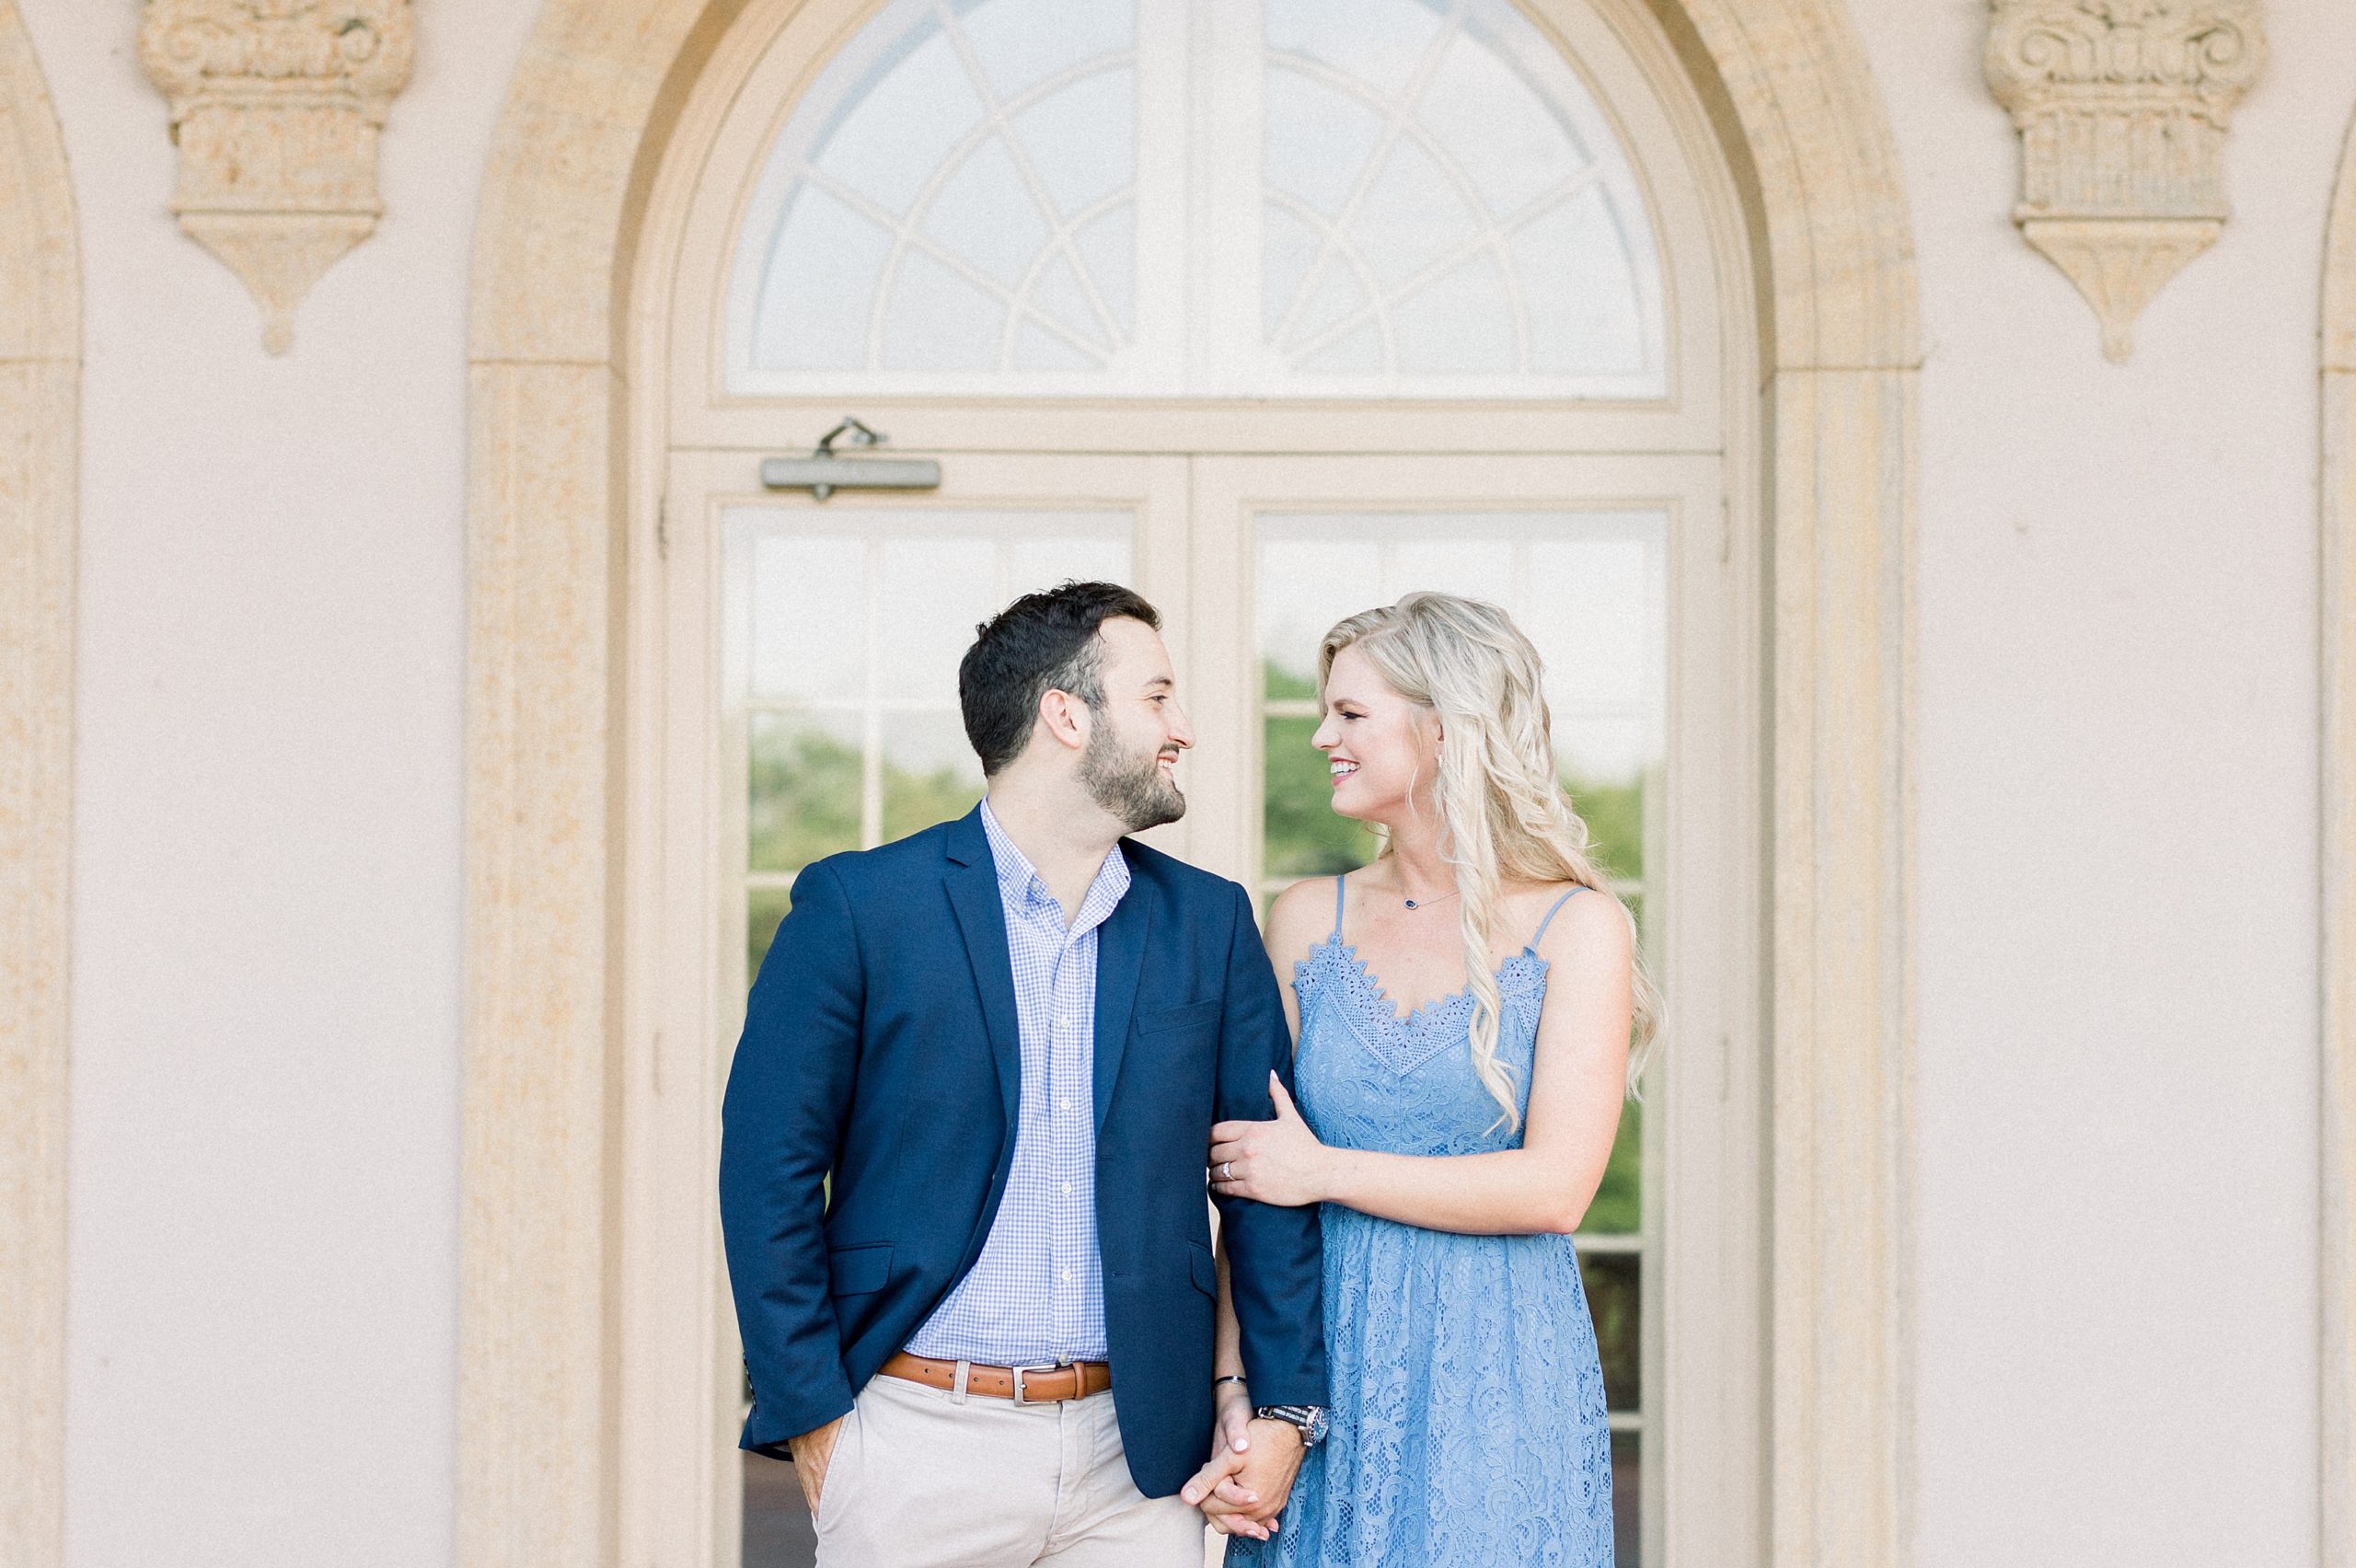 Gorgeous partners, holding hands, as they pose for engagement photos.